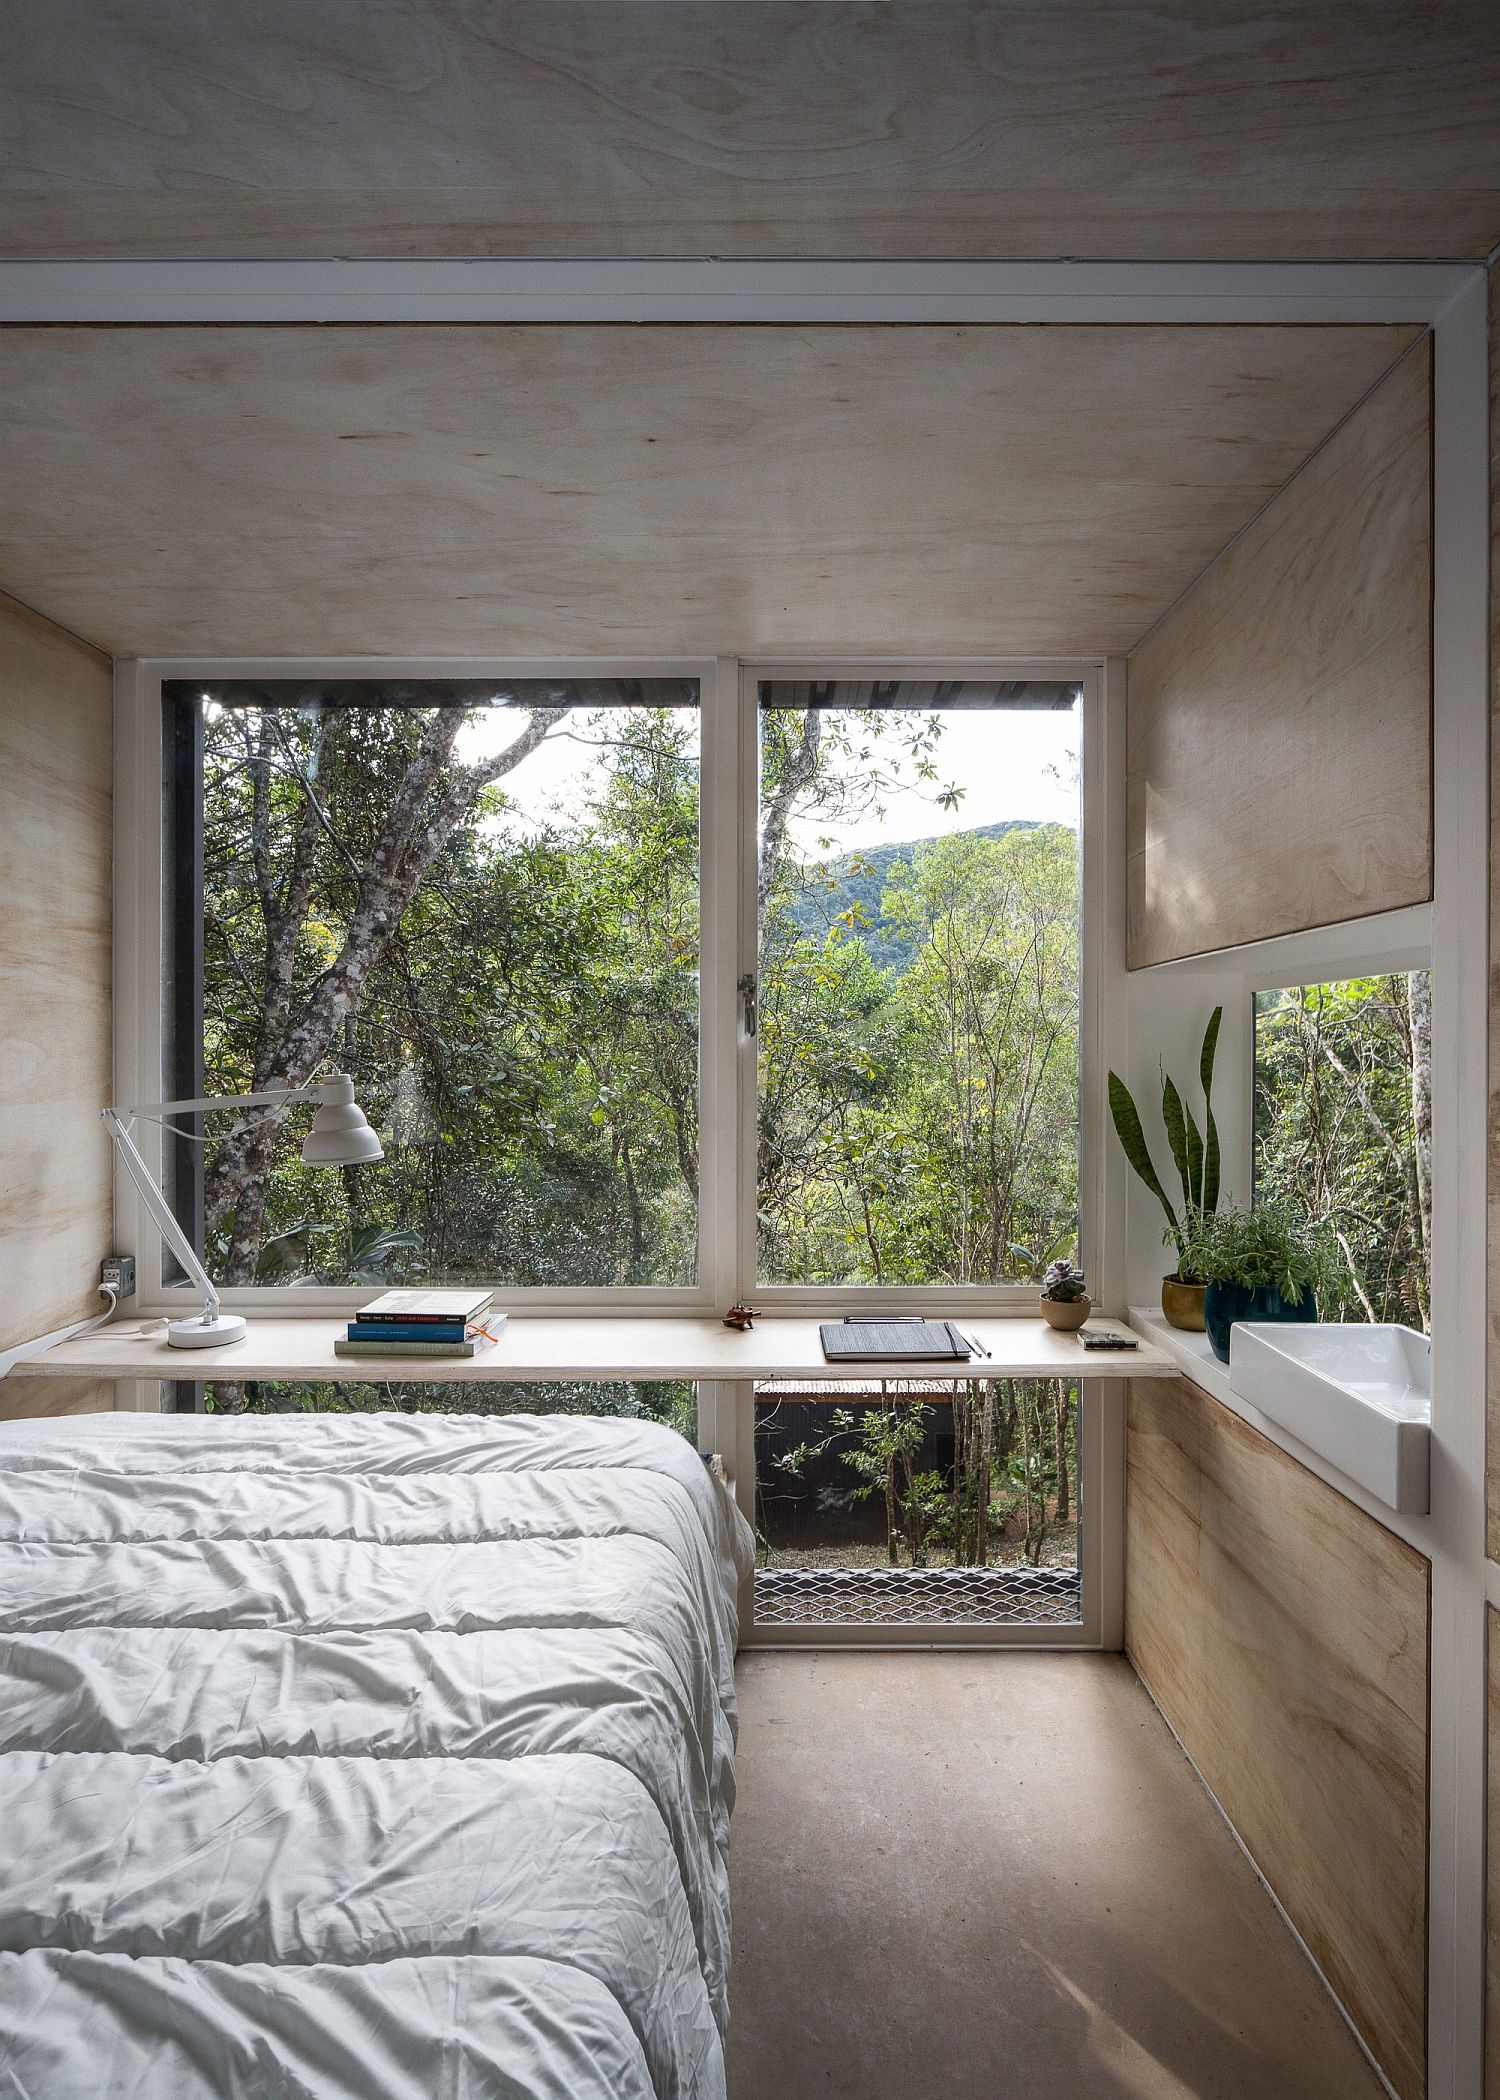 Interior-with-a-desk-bed-and-sink-keeps-things-down-to-a-minimum